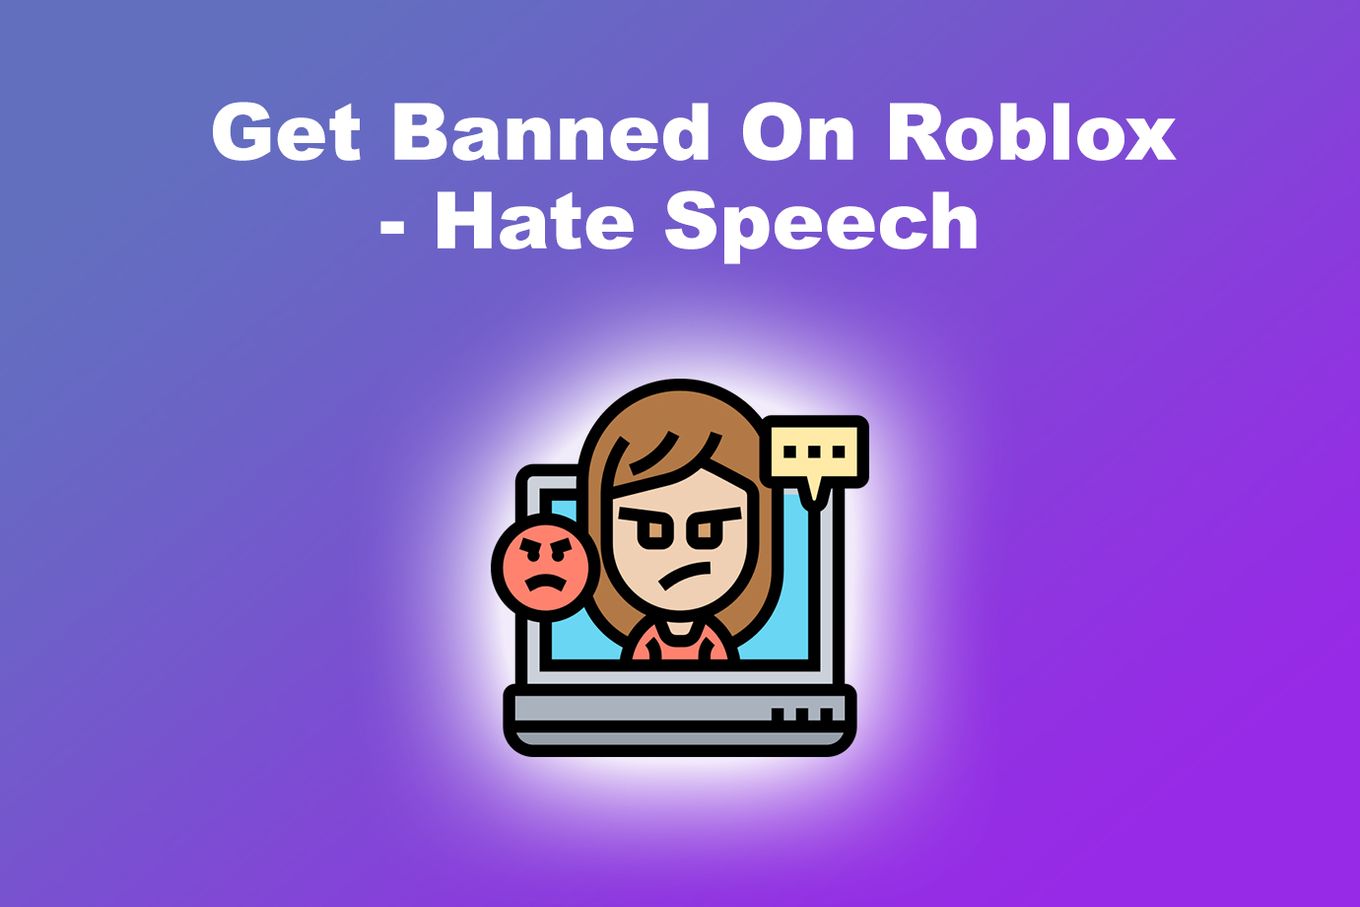 Hate Speech - Get Banned On Roblox